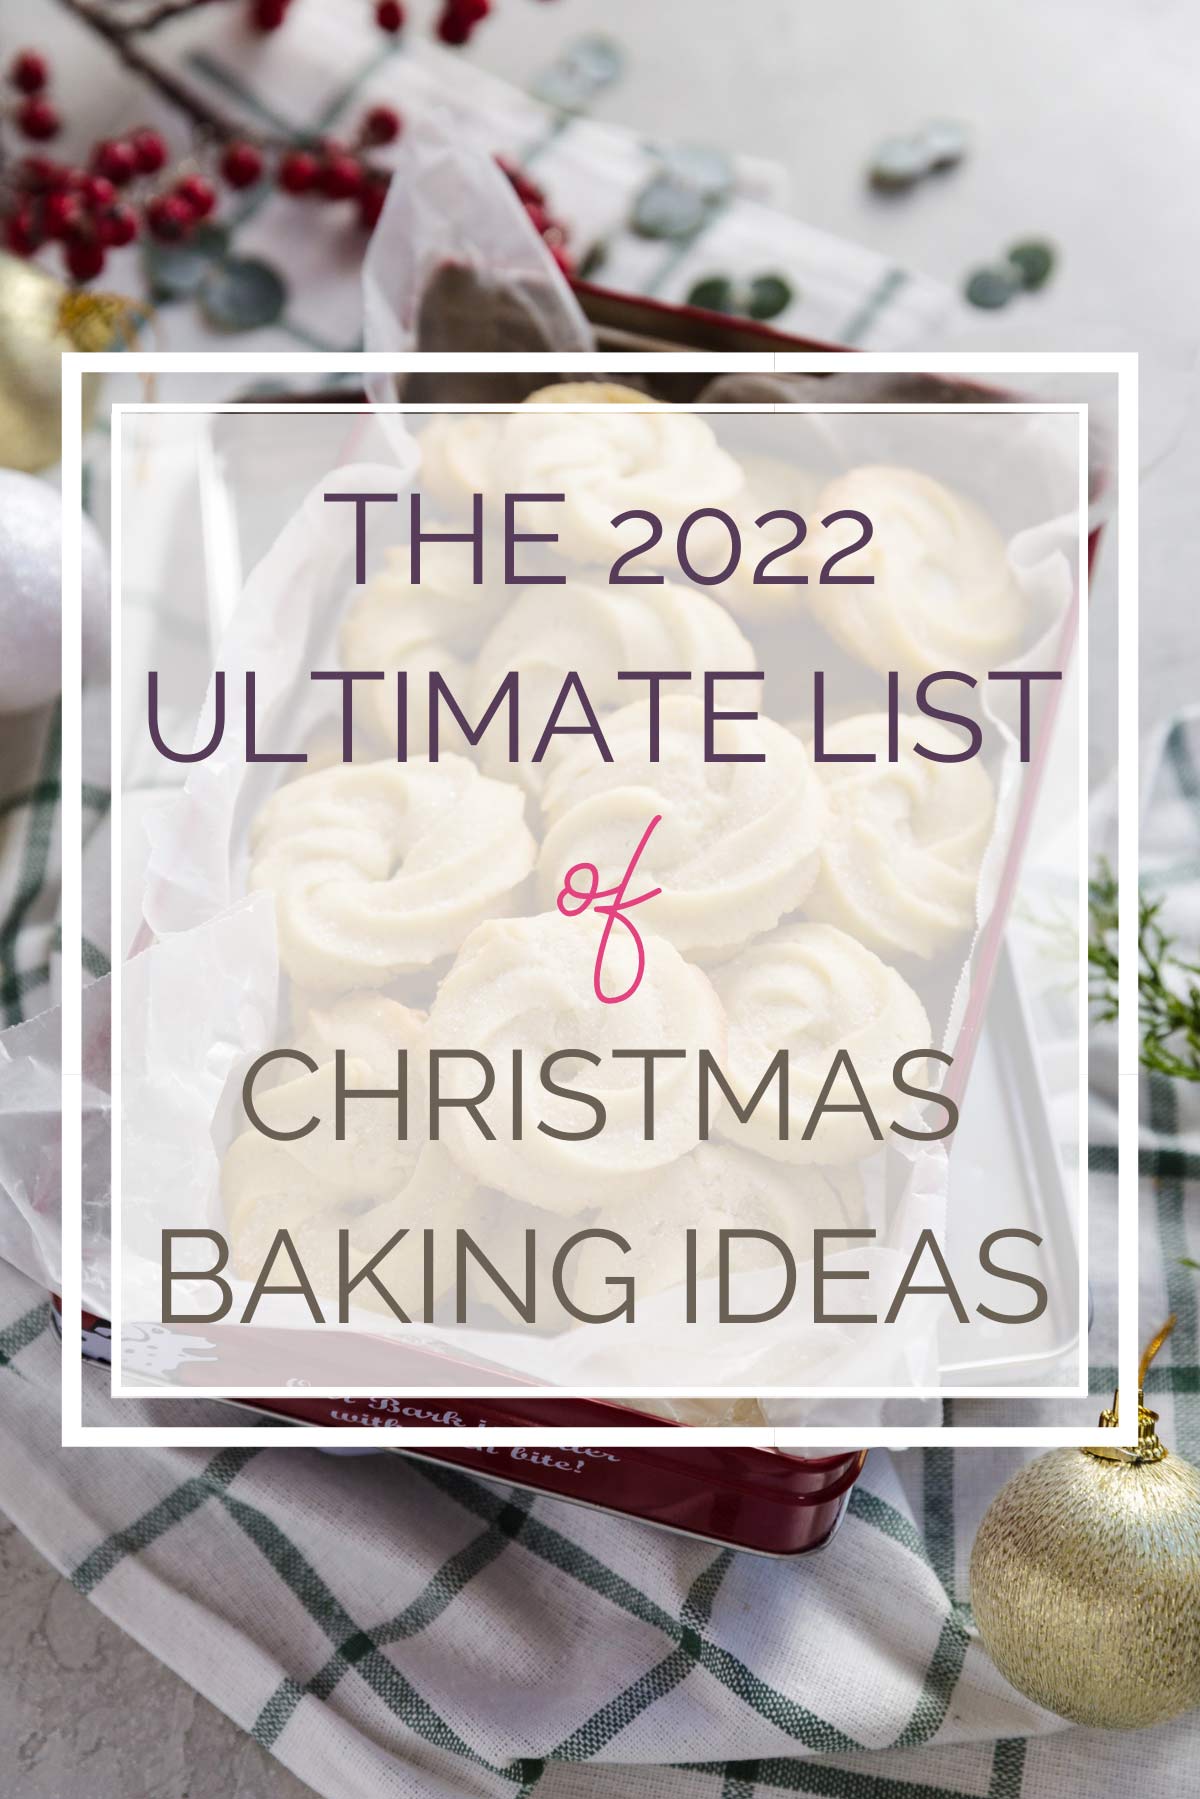 Danish butter cookies in holiday tin with text overlay "The 2022 Ultimate List of Christmas Baking Ideas".